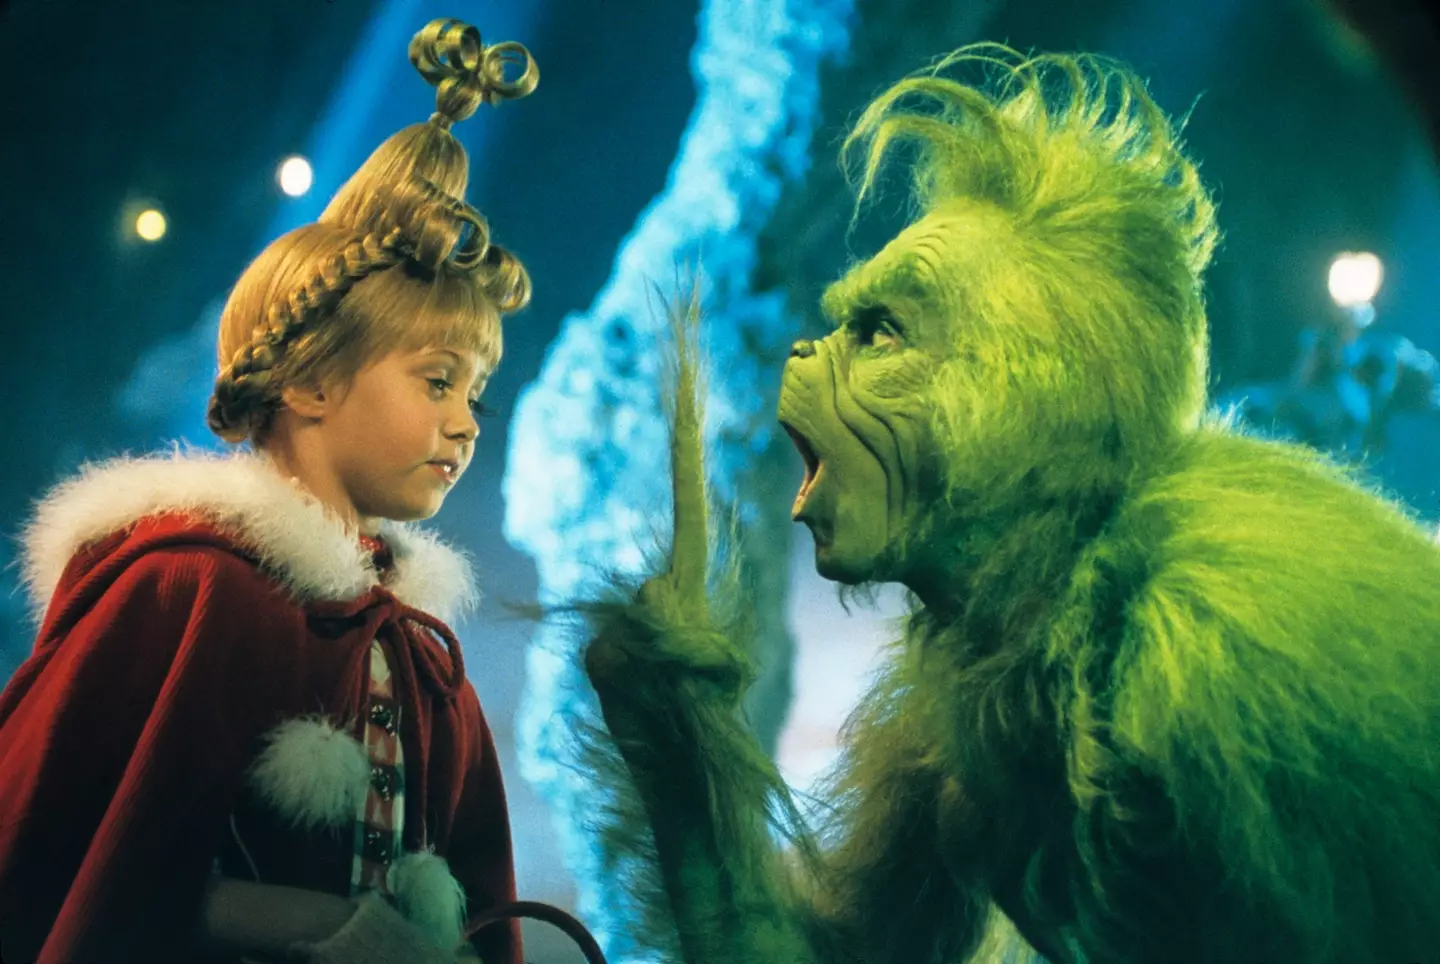 Jim Carrey as the Grinch back in 2000.